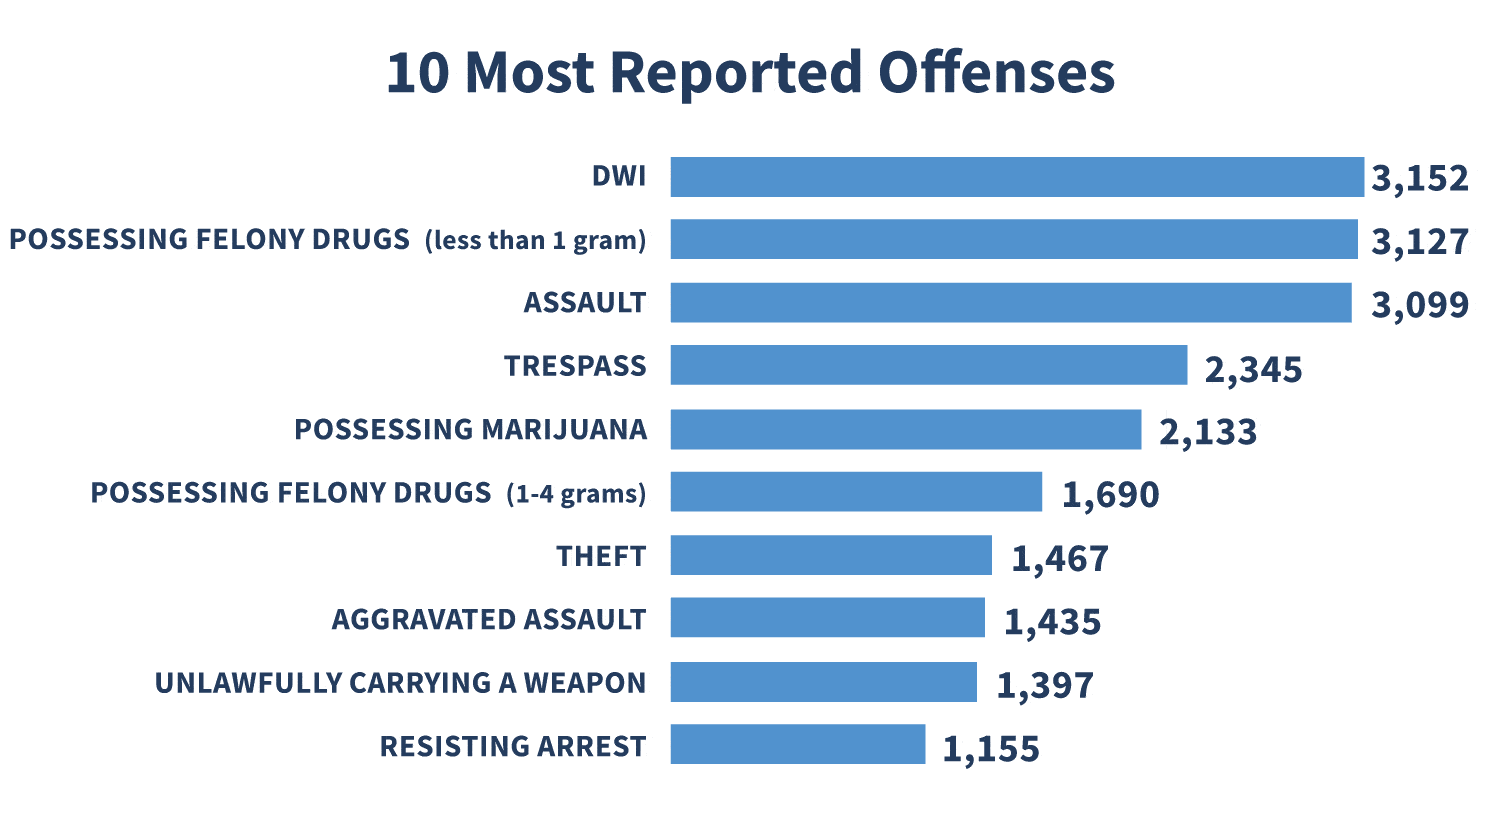 10 most reported offenses